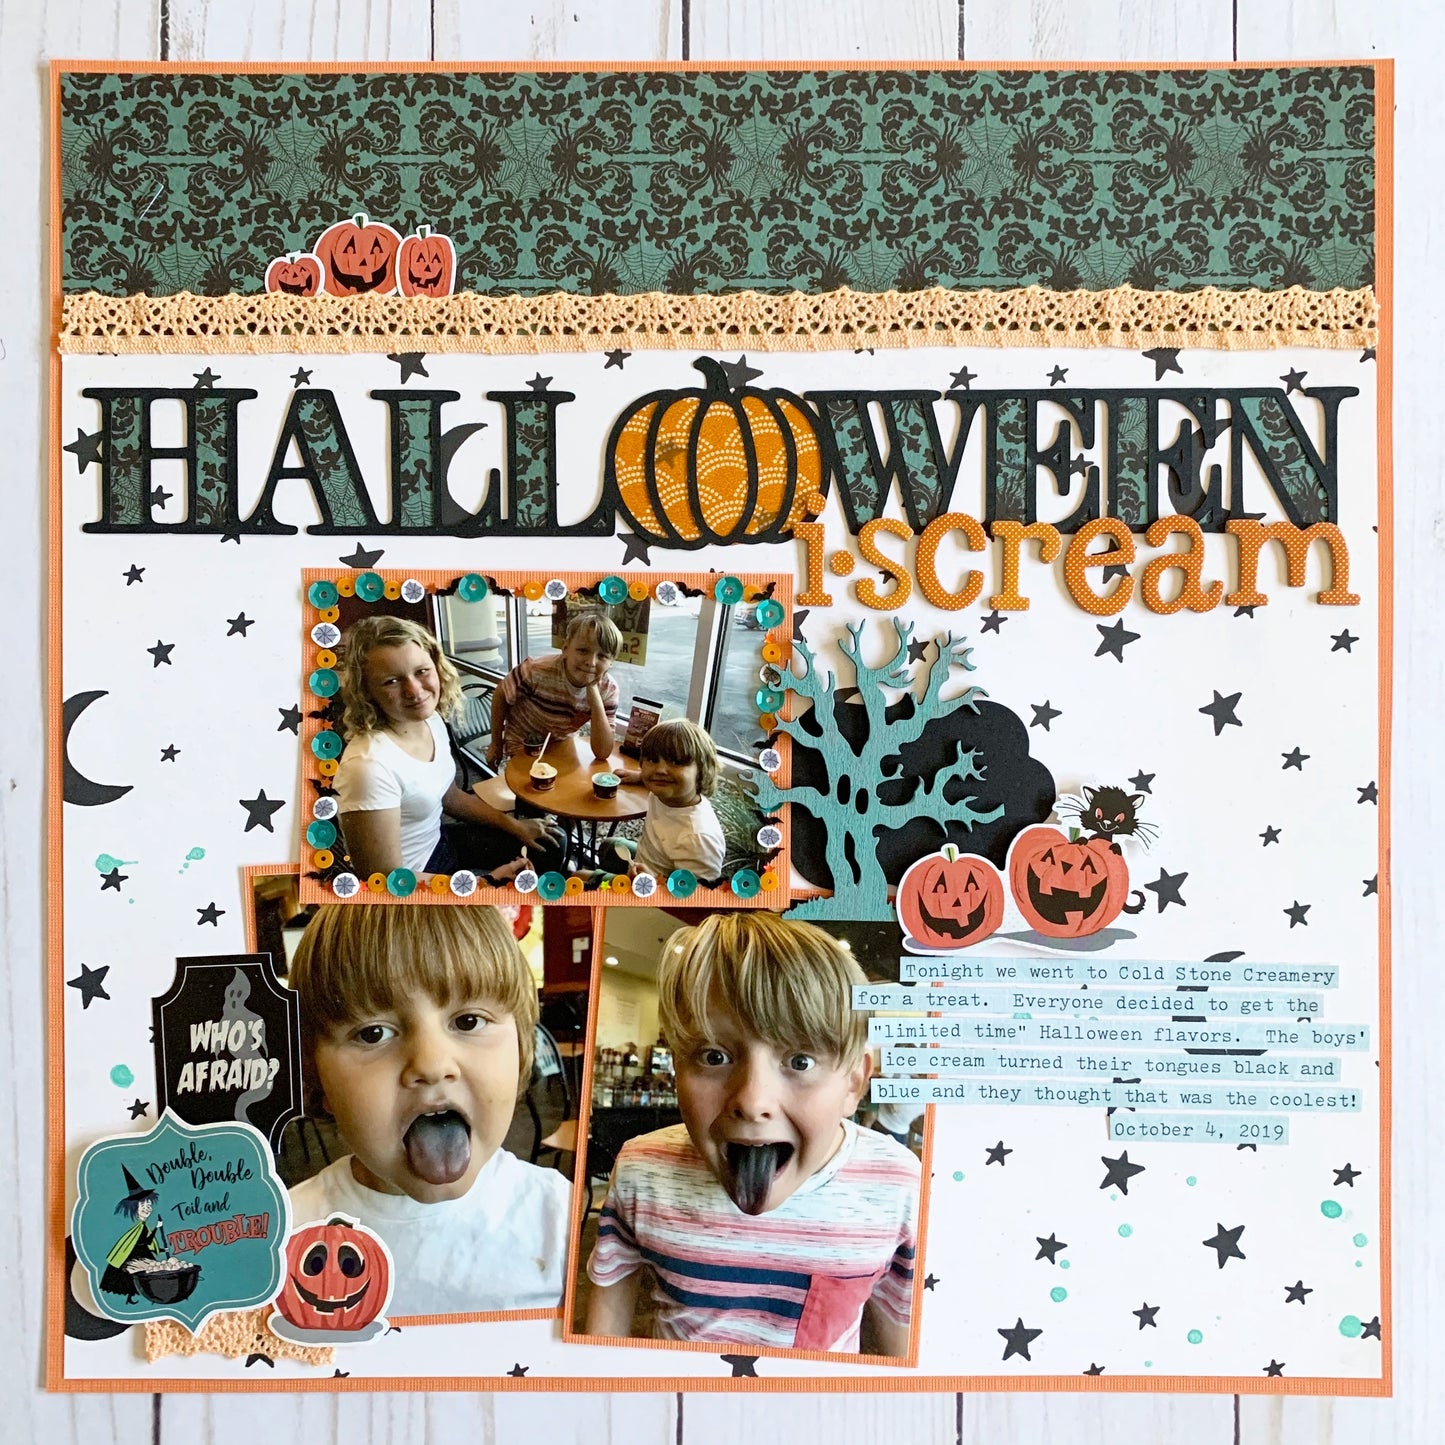 "Spooky Nights" Deluxe Theme Kit